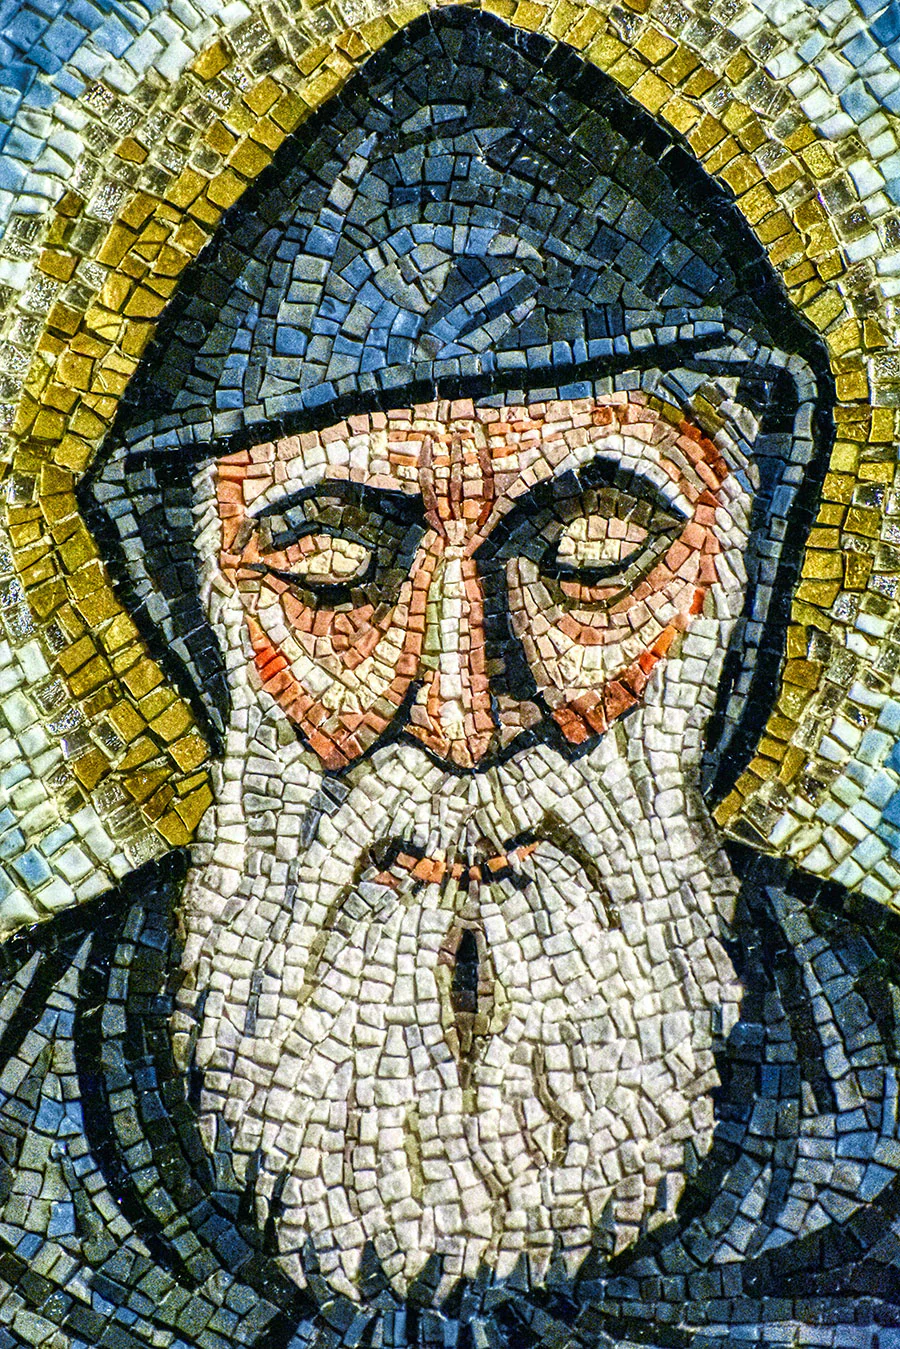 types of the mosaic art